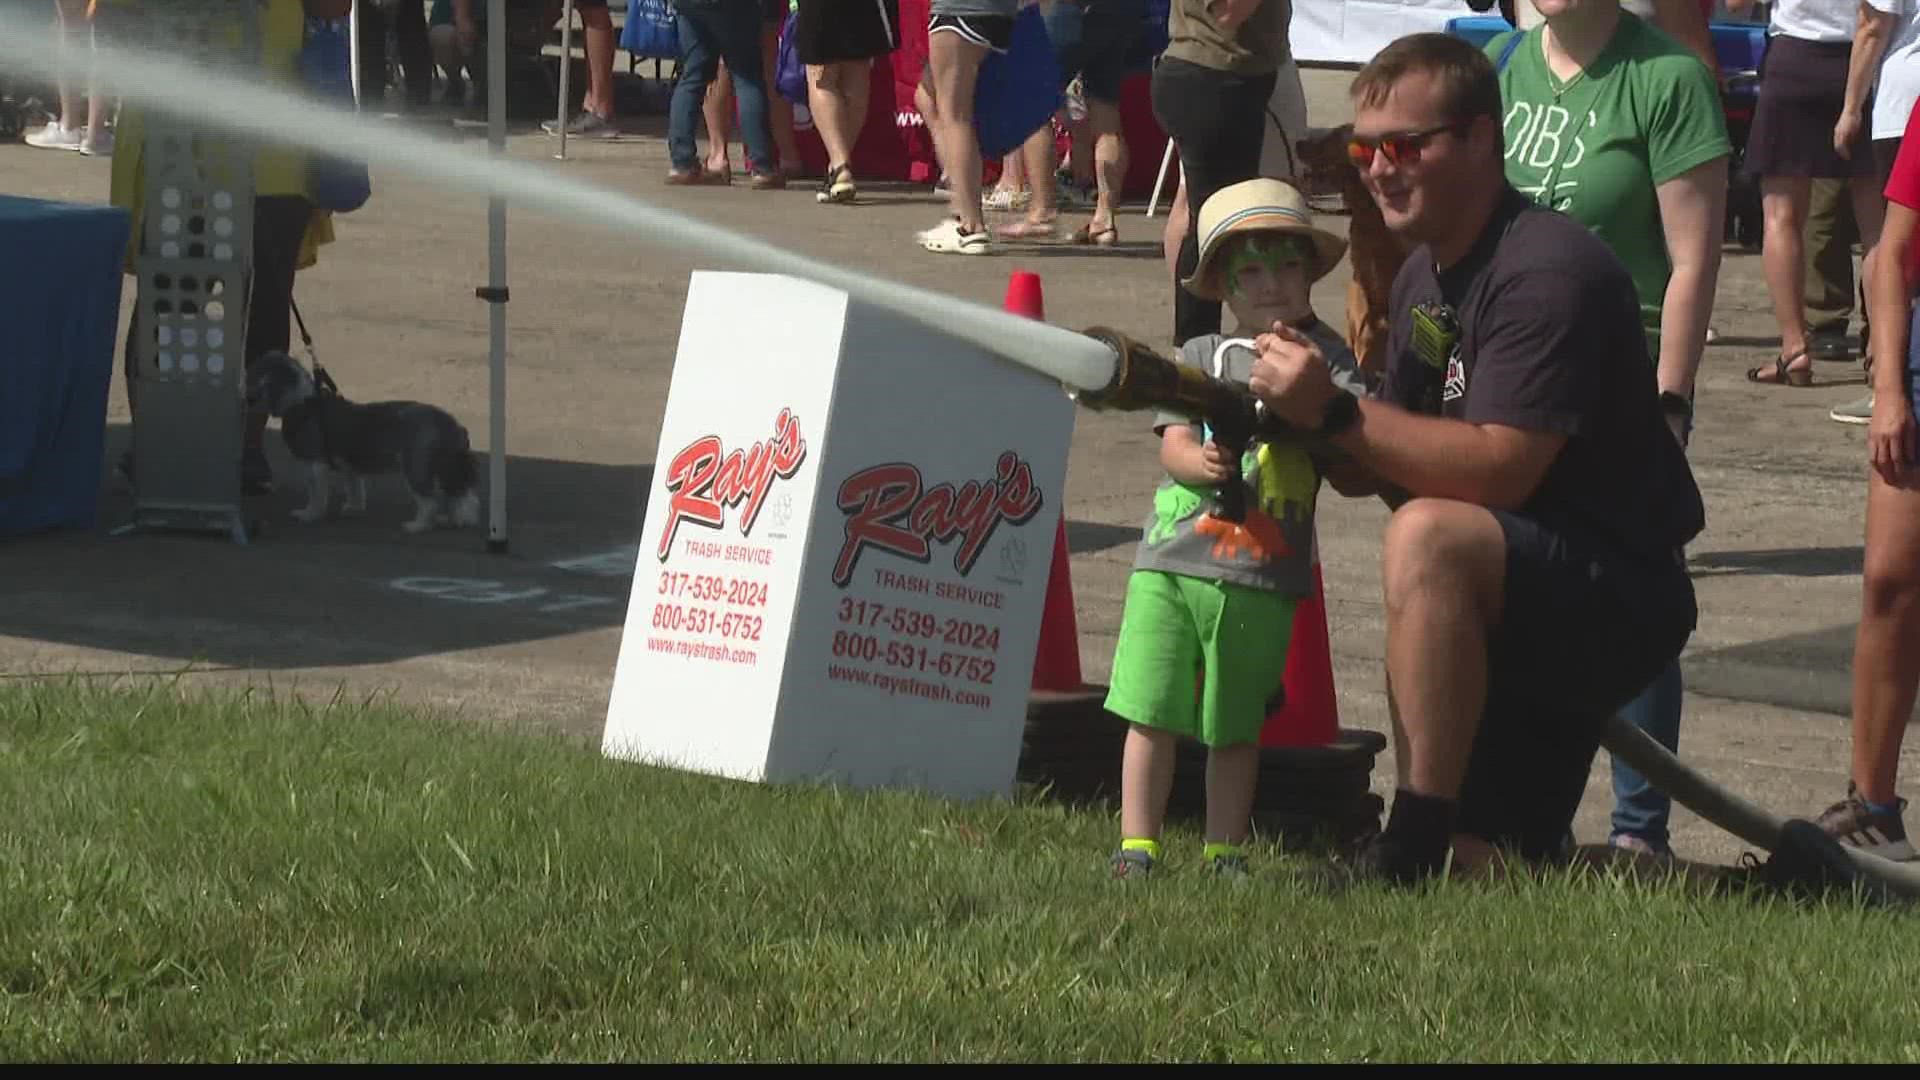 Families came out to meet first responders Saturday in Lawrence.